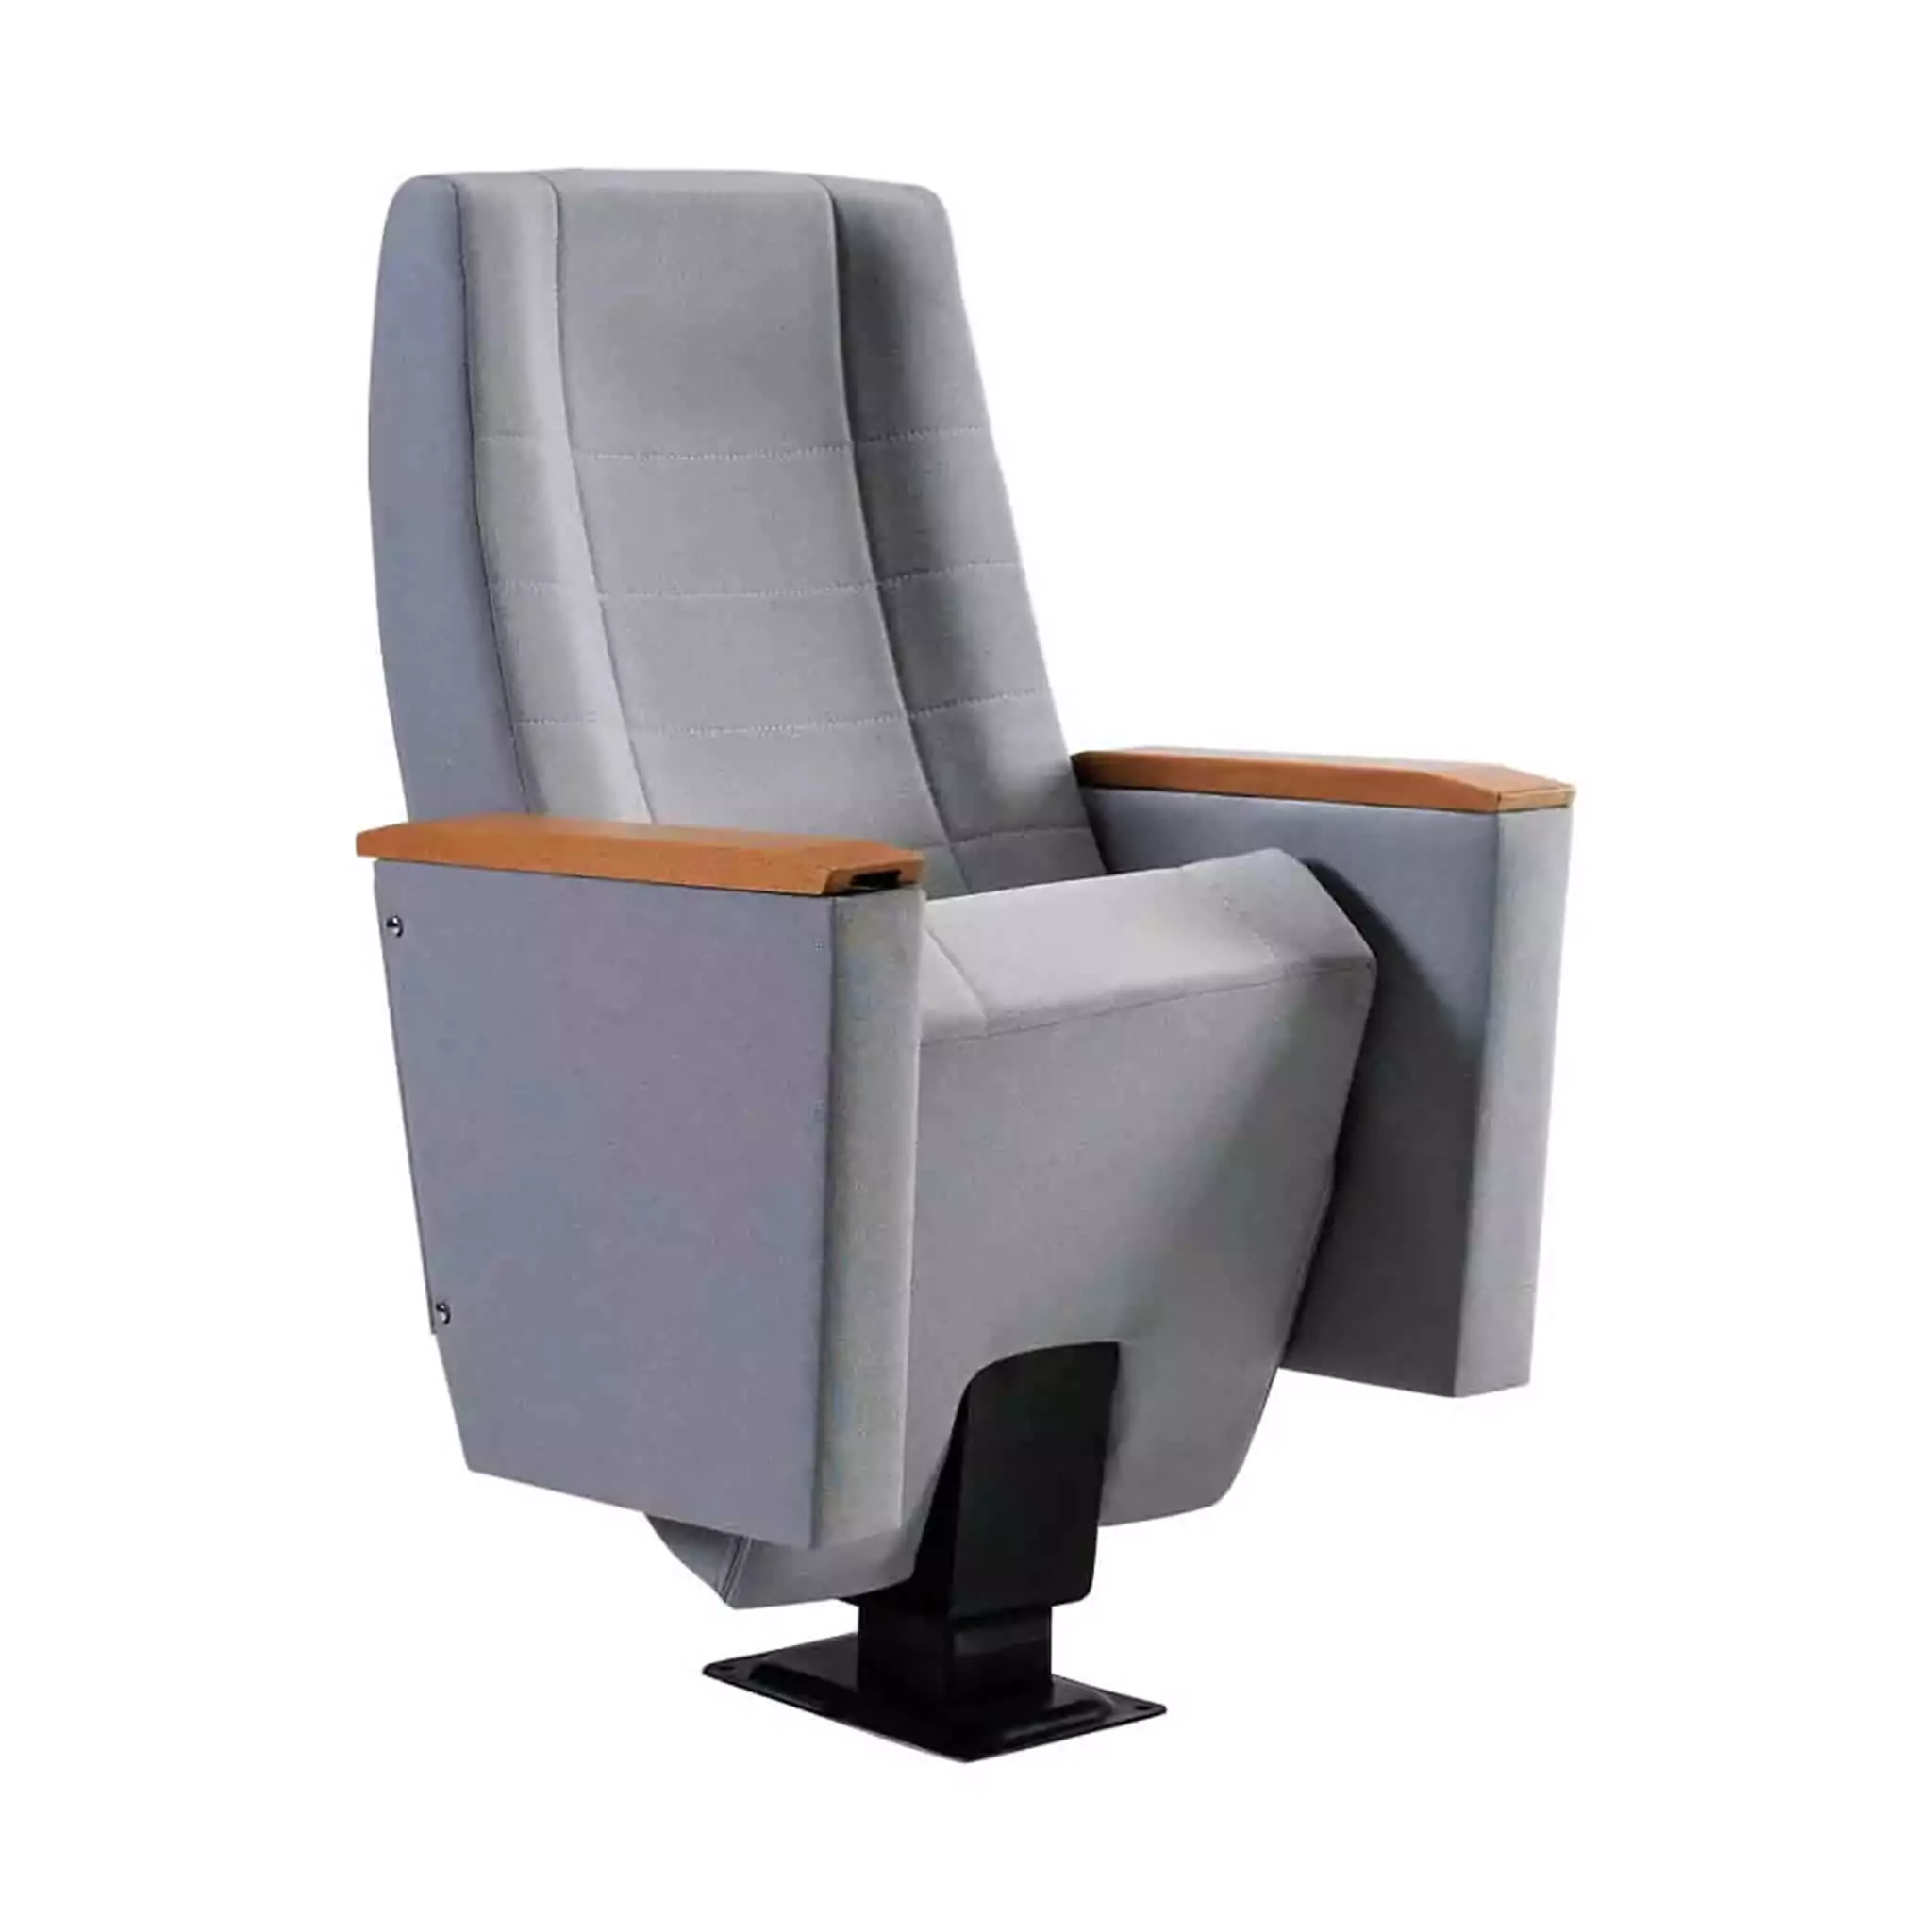 Simko Seating Product Conference Seat Aquamarin